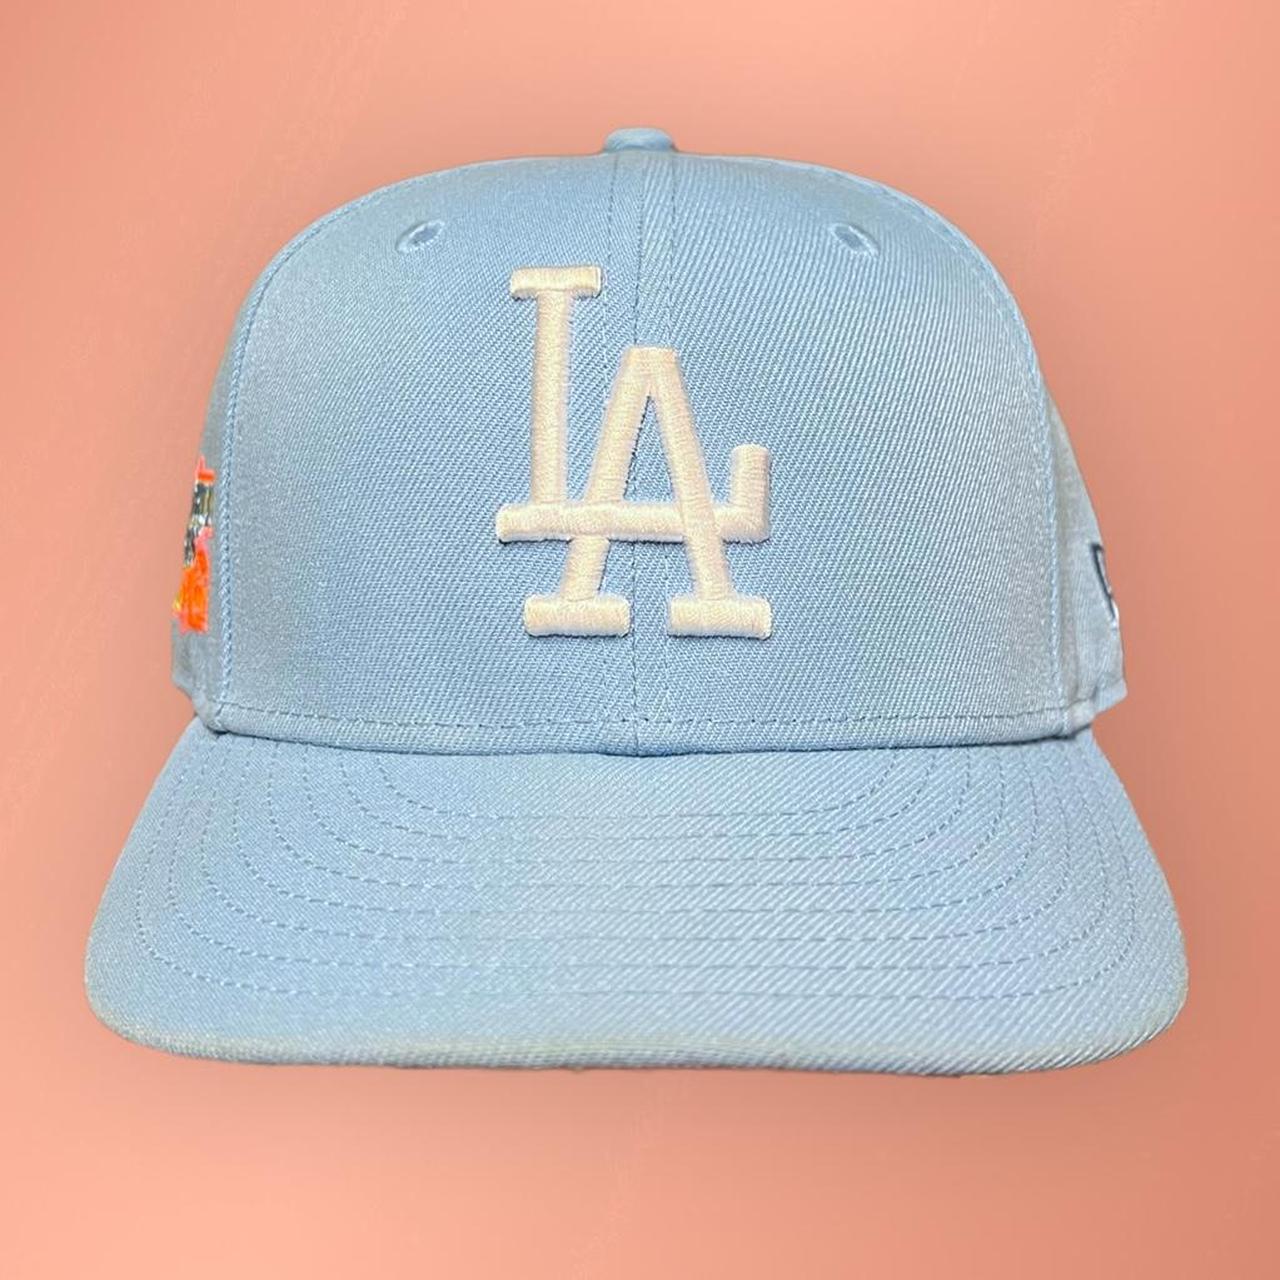 RARE Exclusive SOLD OUT LA LOS ANGELES Dodgers 59fifty New Era